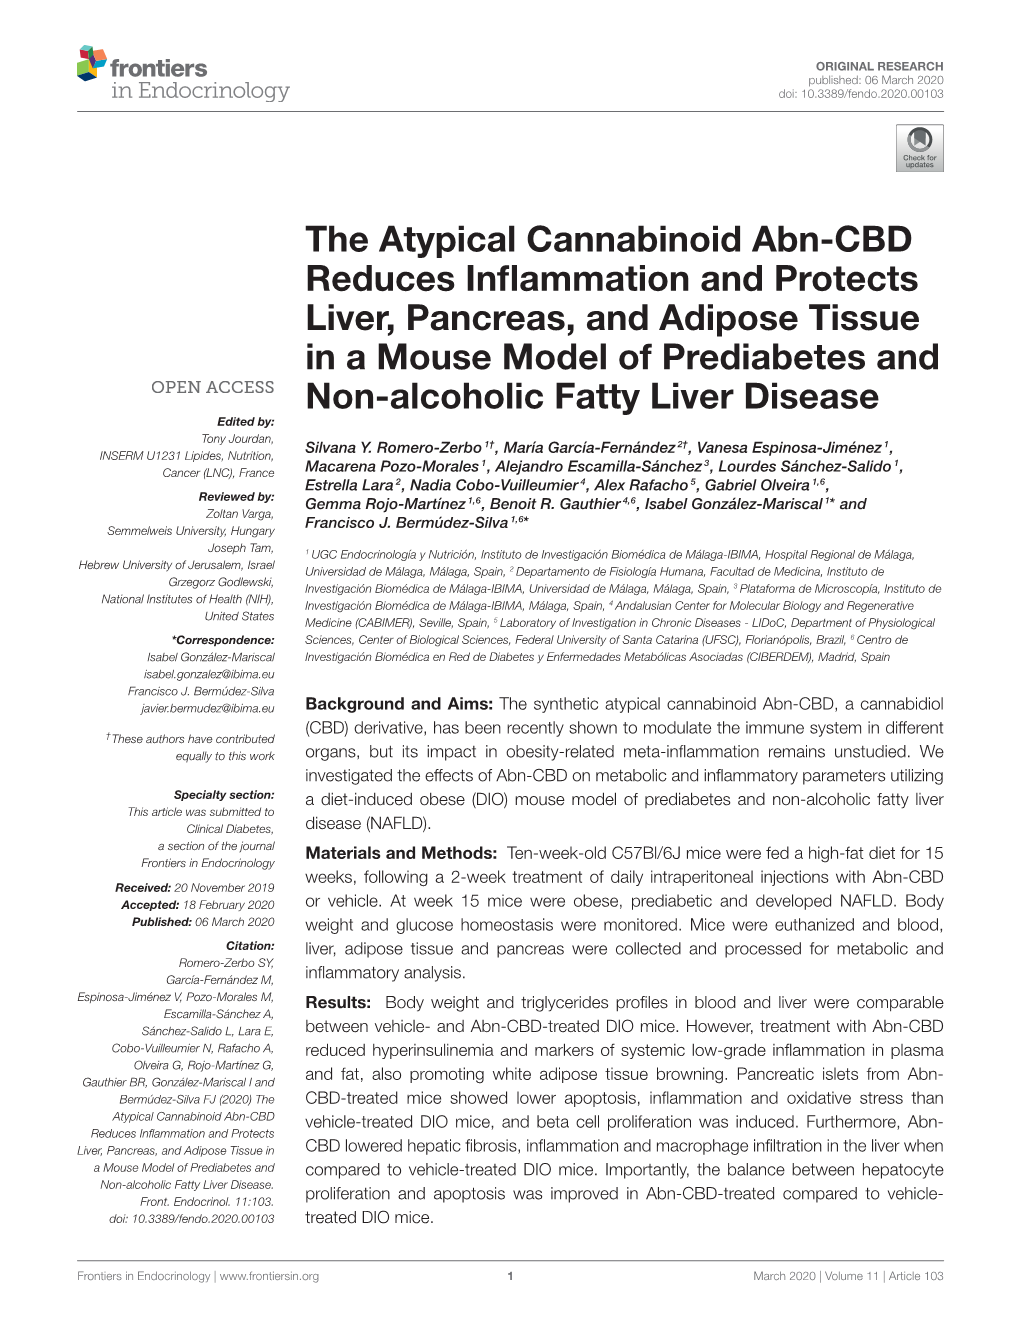 The Atypical Cannabinoid Abn-CBD Reduces Inflammation and Protects